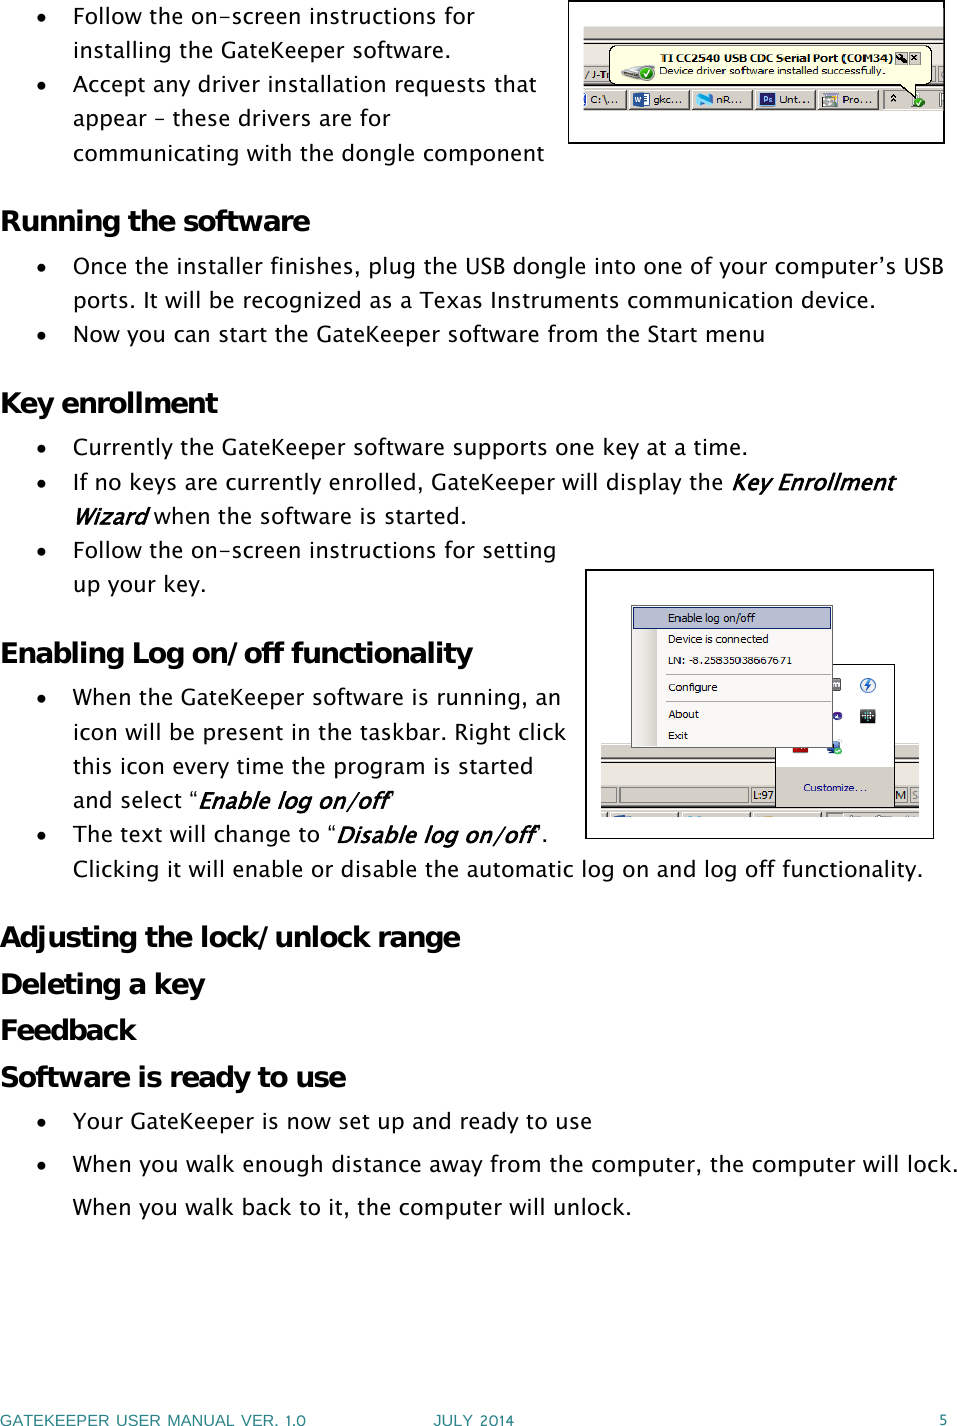 GATEKEEPER USER MANUAL VER.1.0 JULY 2014 5Follow the on-screen instructions forinstalling the GateKeeper software.Accept any driver installation requests thatappear – these drivers are forcommunicating with the dongle componentRunning the softwareOnce the installer finishes, plug the USB dongle into one of your computer’s USBports. It will be recognized as a Texas Instruments communication device.Now you can start the GateKeeper software from the Start menuKey enrollmentCurrently the GateKeeper software supports one key at a time.If no keys are currently enrolled, GateKeeper will display theKey EnrollmentWizardwhen the software is started.Follow the on-screen instructions for settingup your key.Enabling Log on/off functionalityWhen the GateKeeper software is running, anicon will be present in the taskbar. Right clickthis icon every time the program is startedand select “Enable log on/off”Thetextwillchangeto“Disable log on/off”.Clicking it will enable or disable the automatic log on and log off functionality.Adjusting the lock/unlock rangeDeleting a keyFeedbackSoftware is ready to useYour GateKeeper is now set up and ready to useWhen you walk enough distance away from the computer, the computer will lock.When you walk back to it, the computer will unlock.